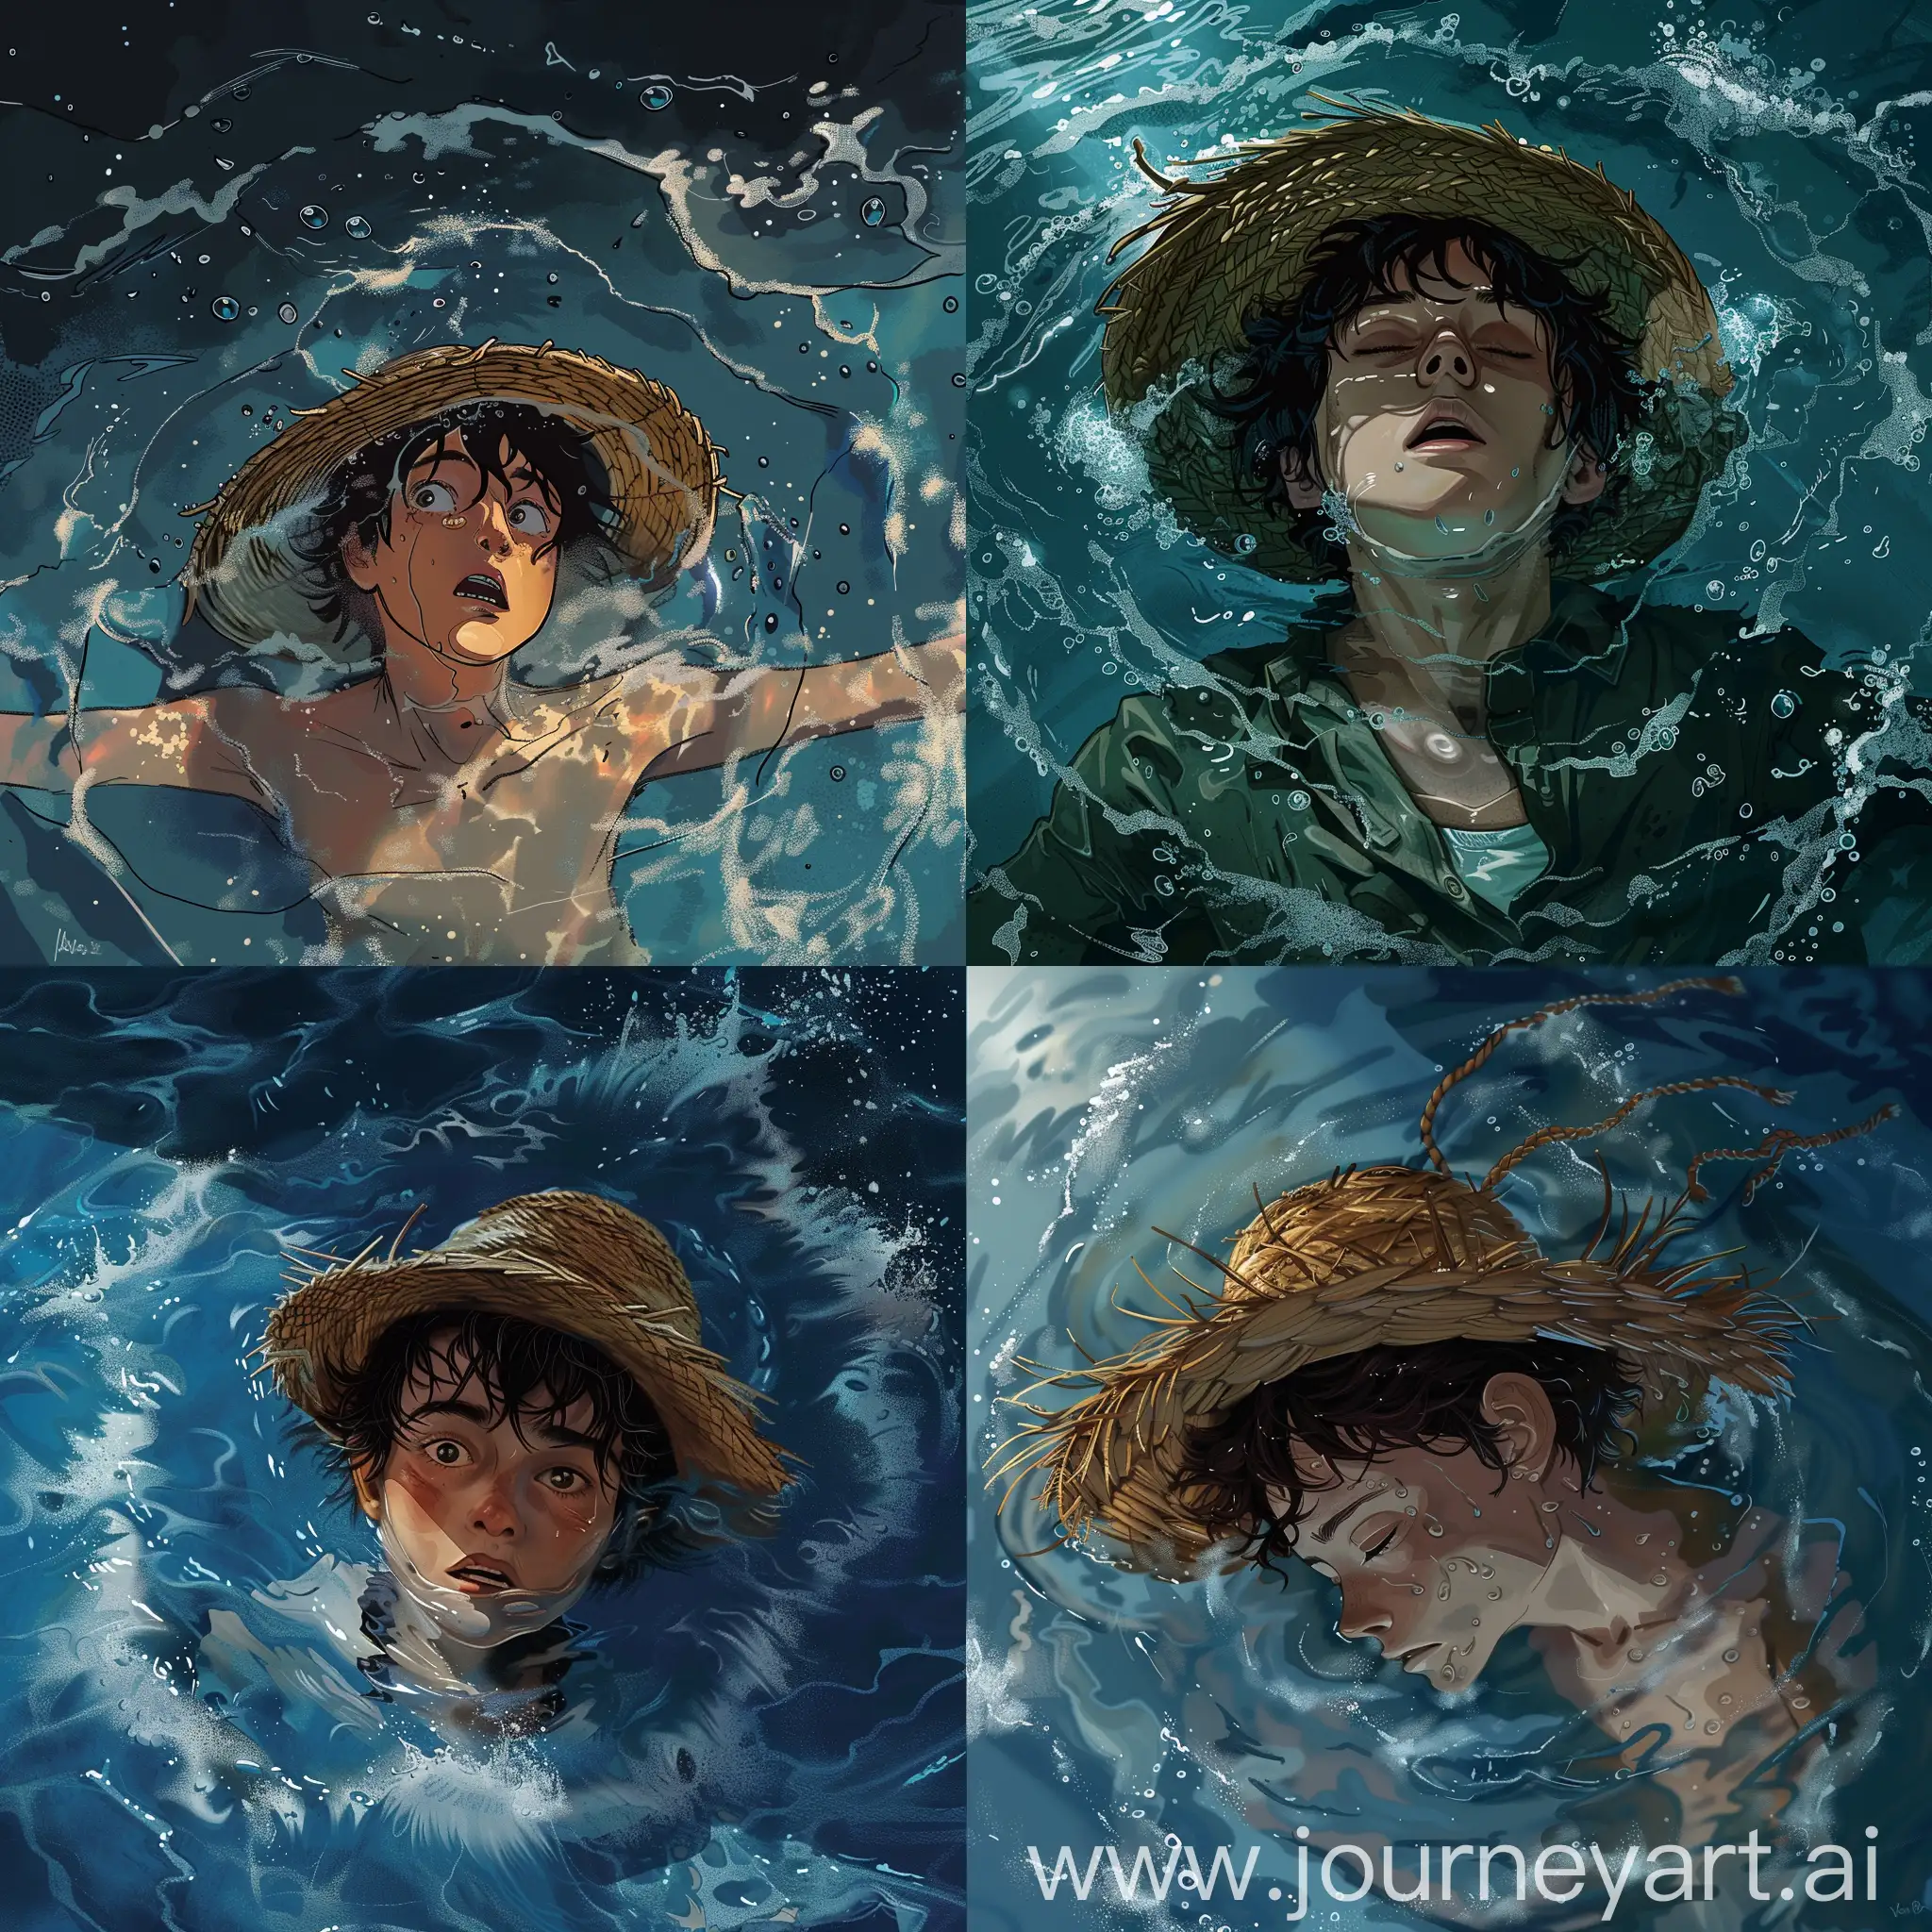 Teenager-in-Straw-Hat-Submerged-in-Deep-Waters-Professional-Digital-Art-Book-Cover